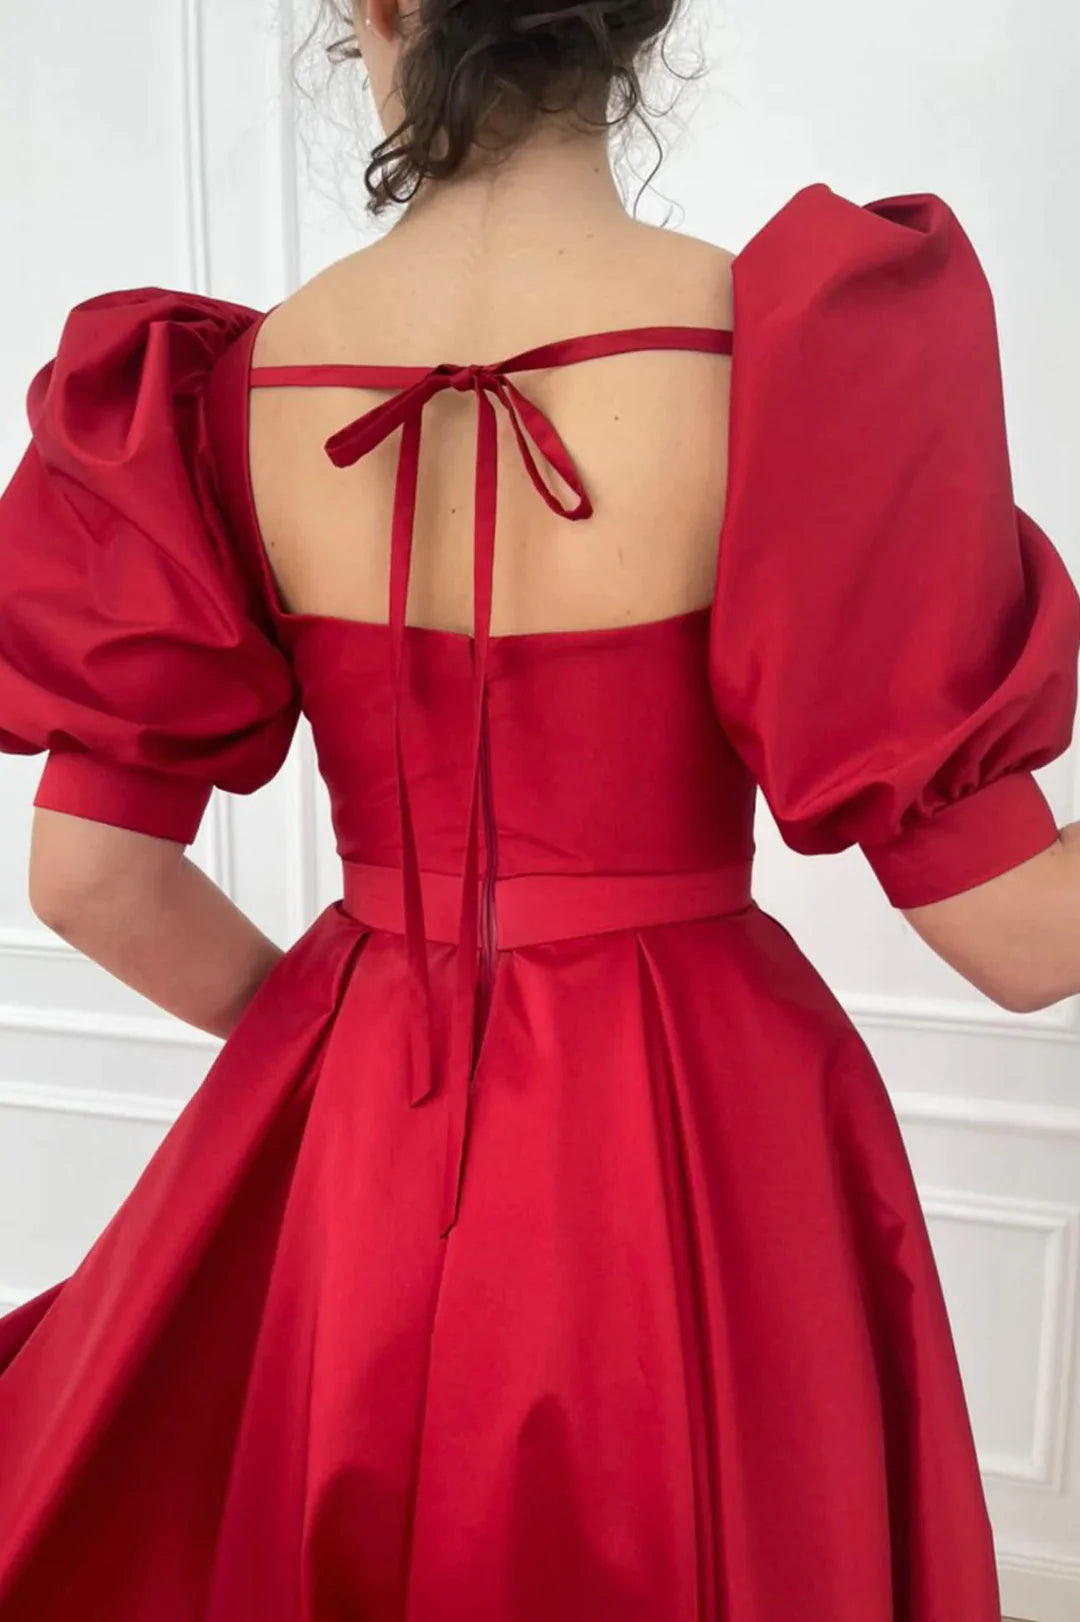 Red Satin Short Prom Dress, Cute Short Sleeve Party Dress with Slit